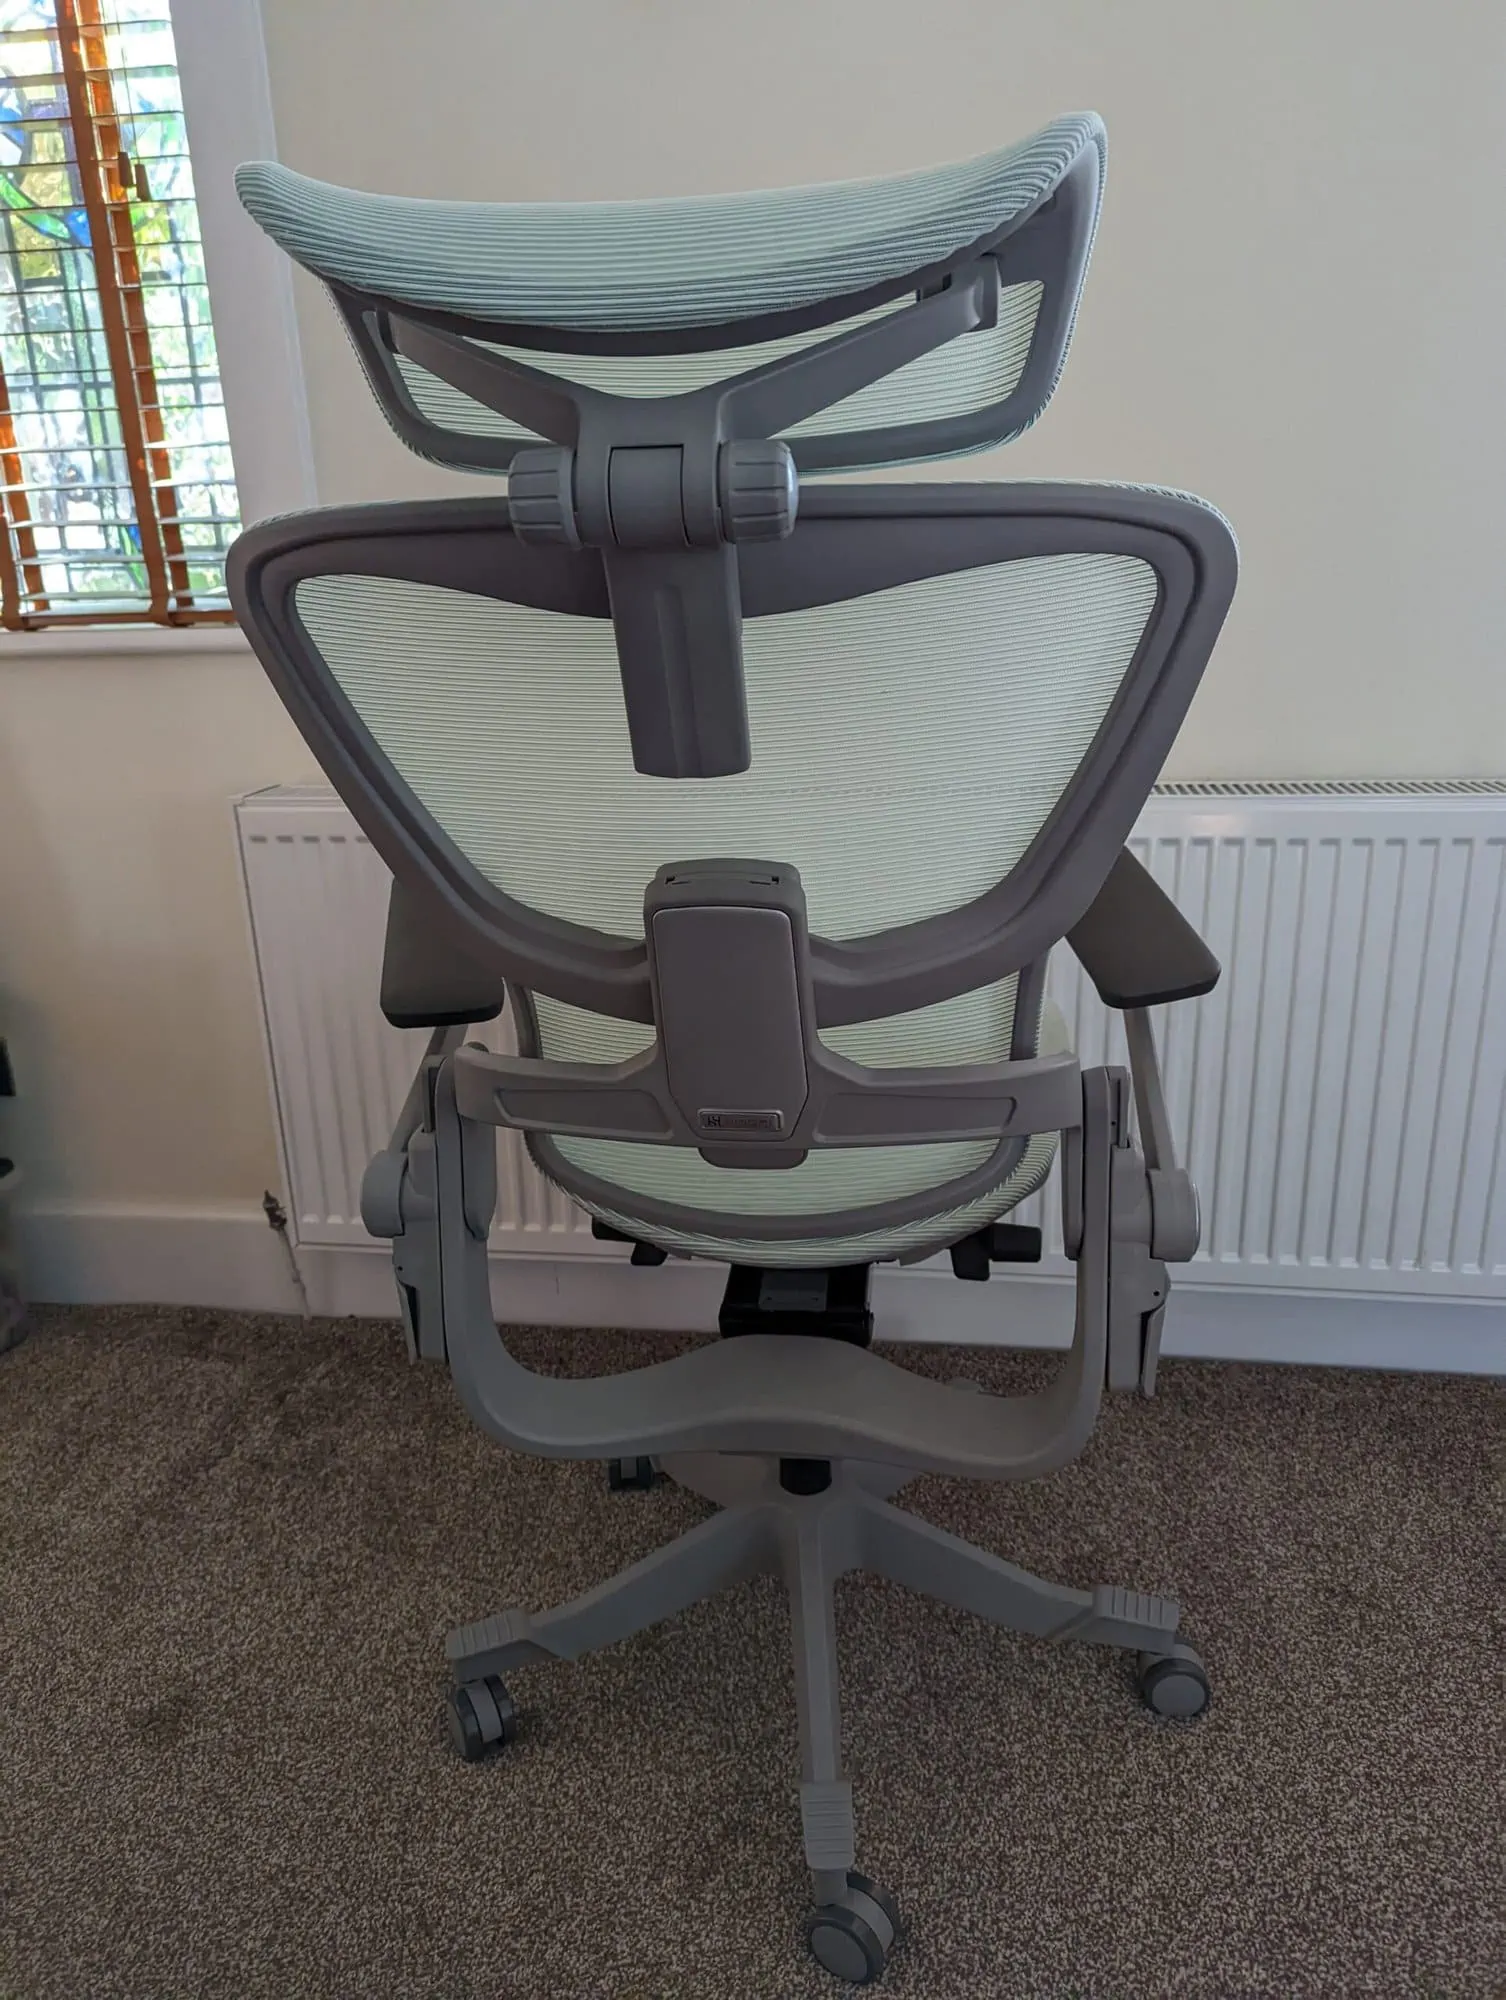 Hinomi H1 Pro Ergonomic Mesh Office Chair Review5 scaled - Hinomi H1 Pro Ergonomic Mesh Office Chair Review – A good Herman Miller alternative with incredible amounts of adjustments